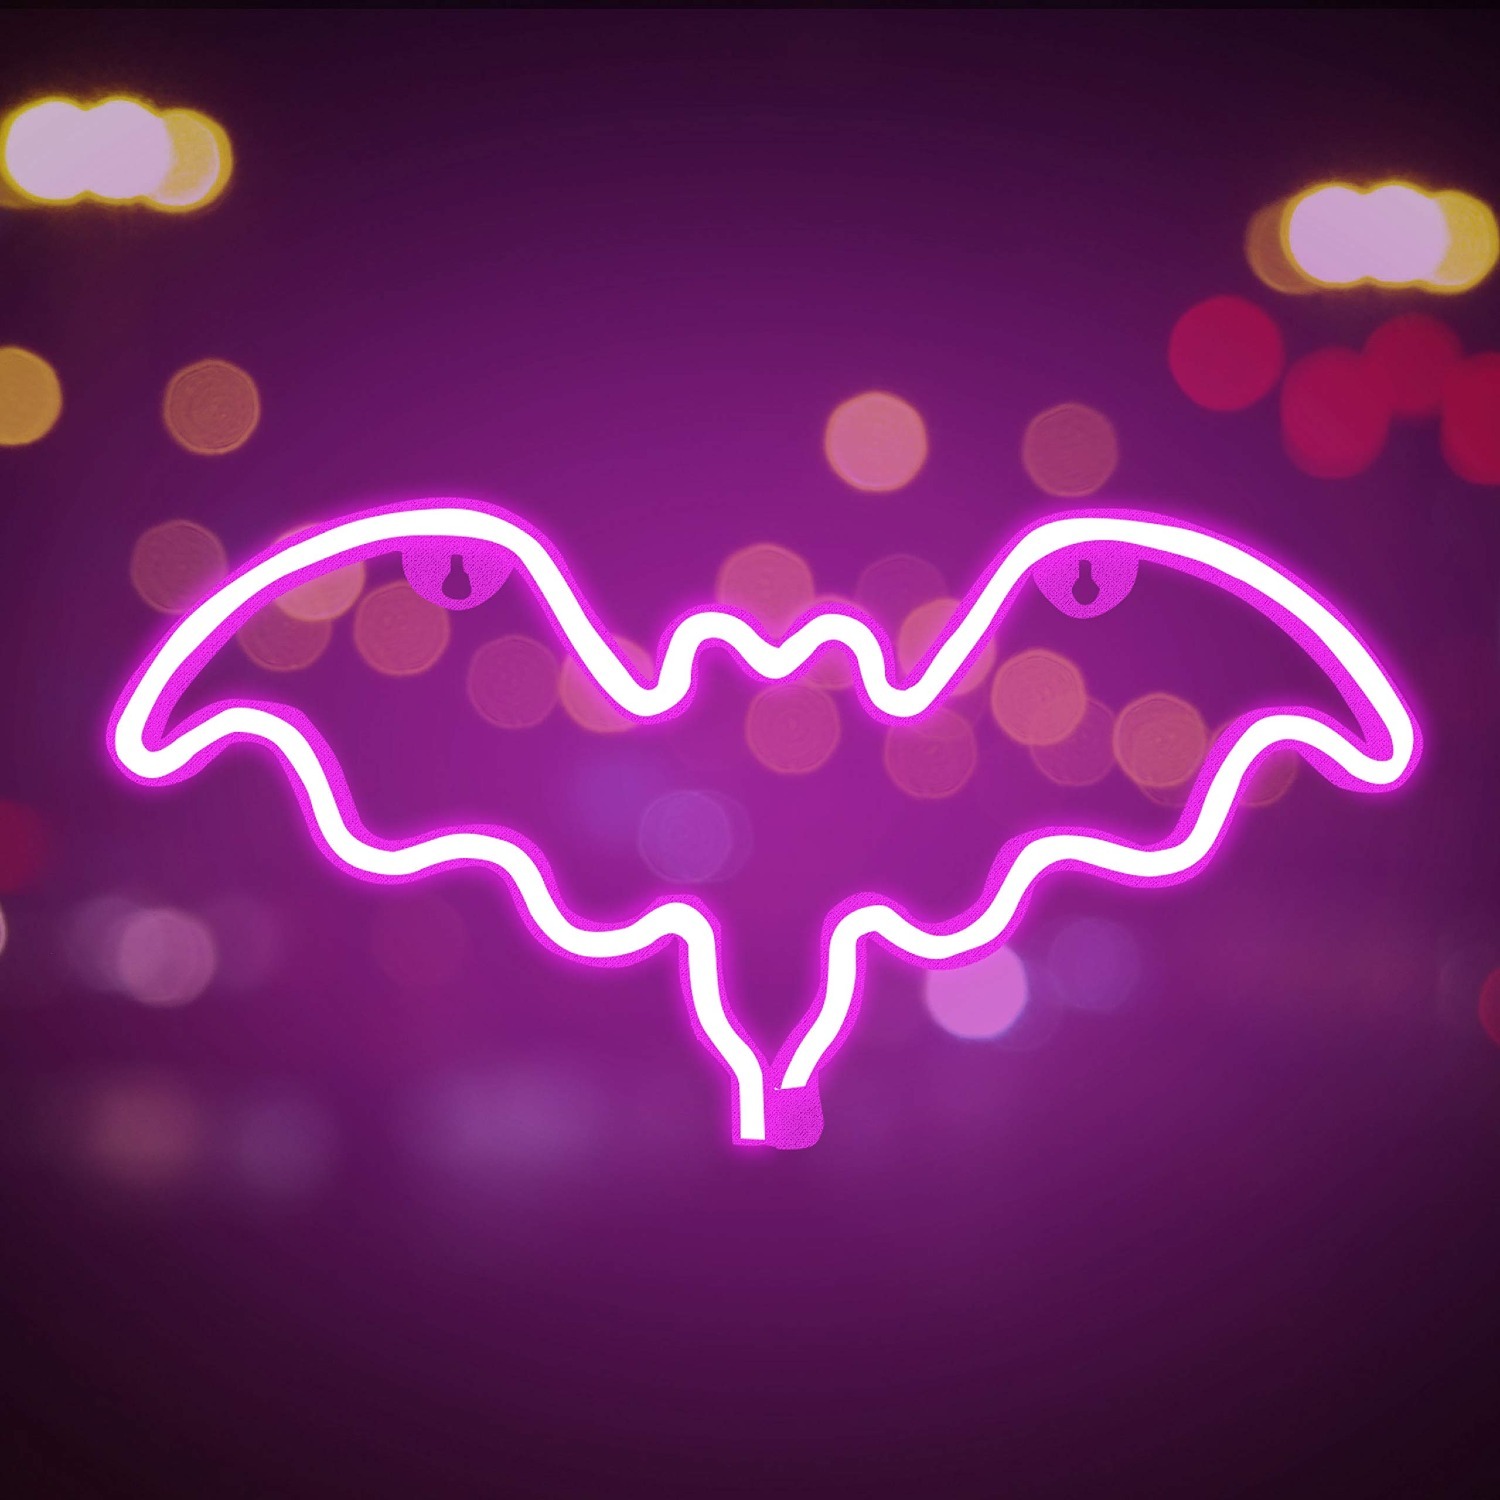 Funpeny Halloween LED Neon Bat Light (Pink), USB Charging & Battery Operated $6 + Free Shipping w/ Prime or $35+ Orders